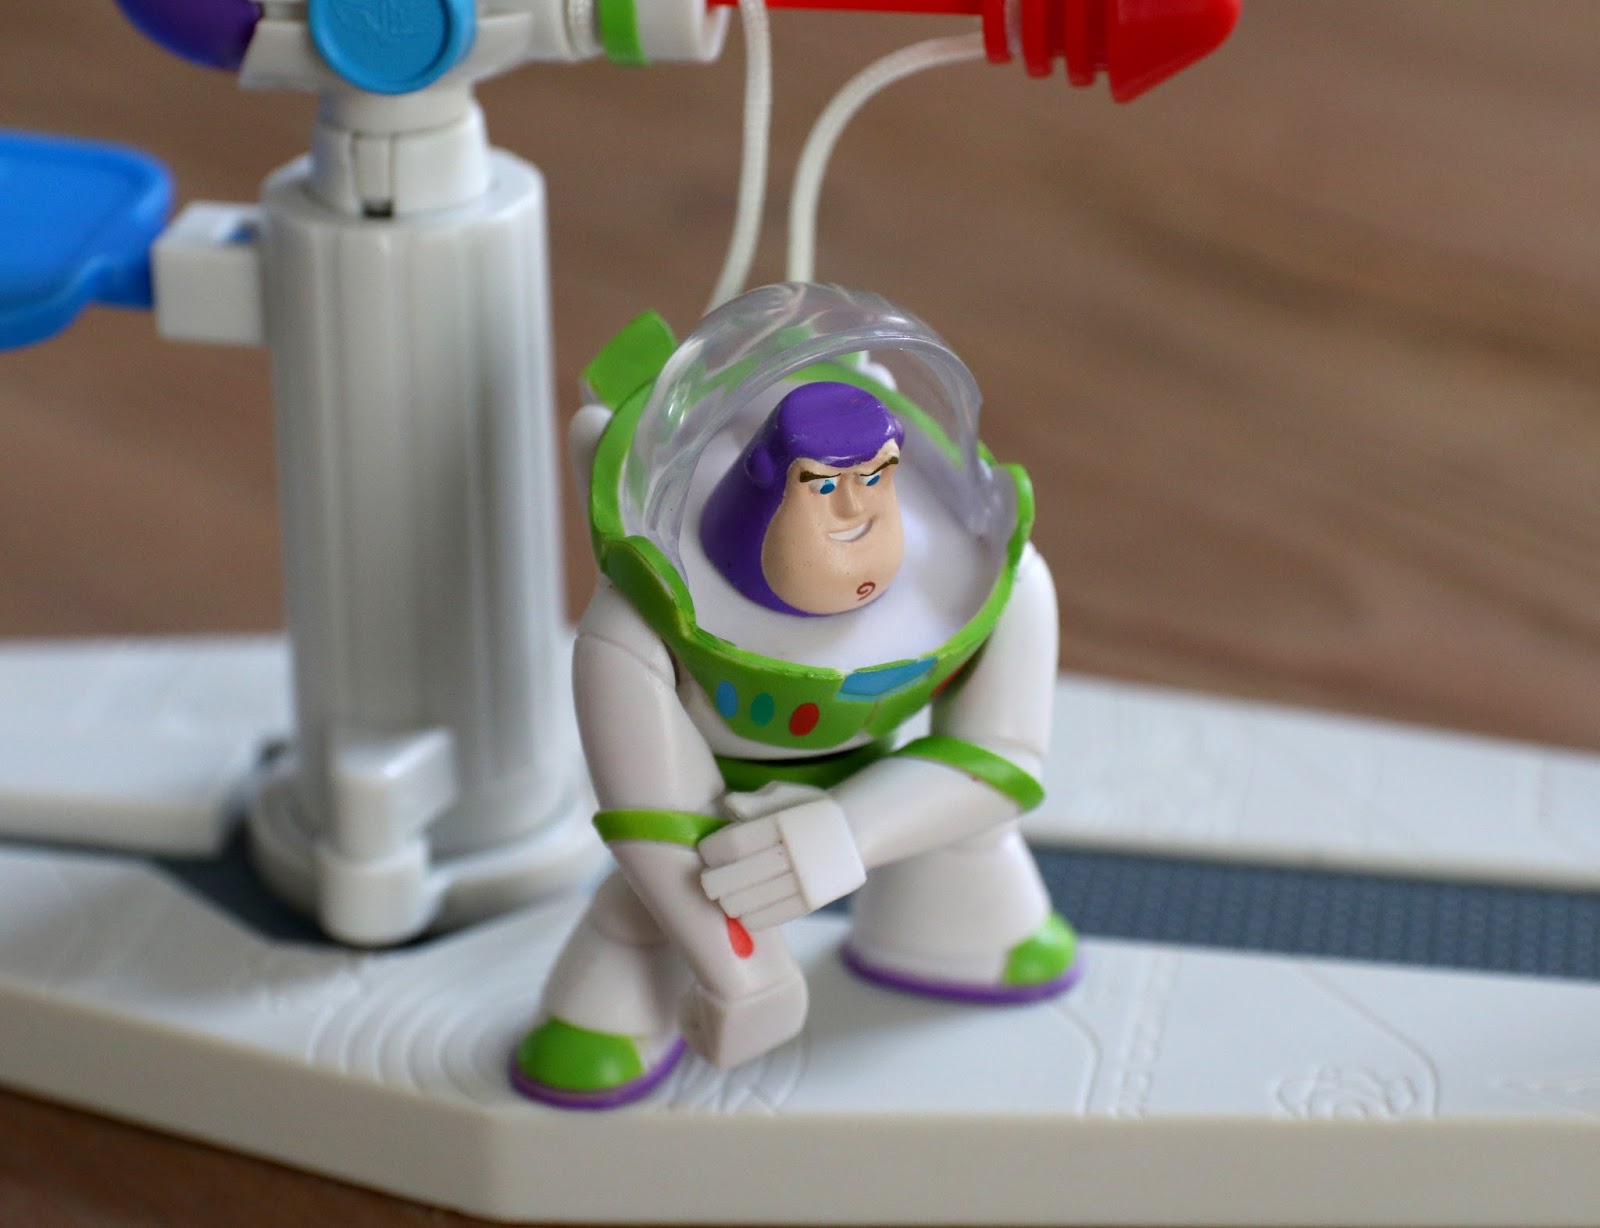 Toy Story Space Ranger Training Center "Action Links" Playset